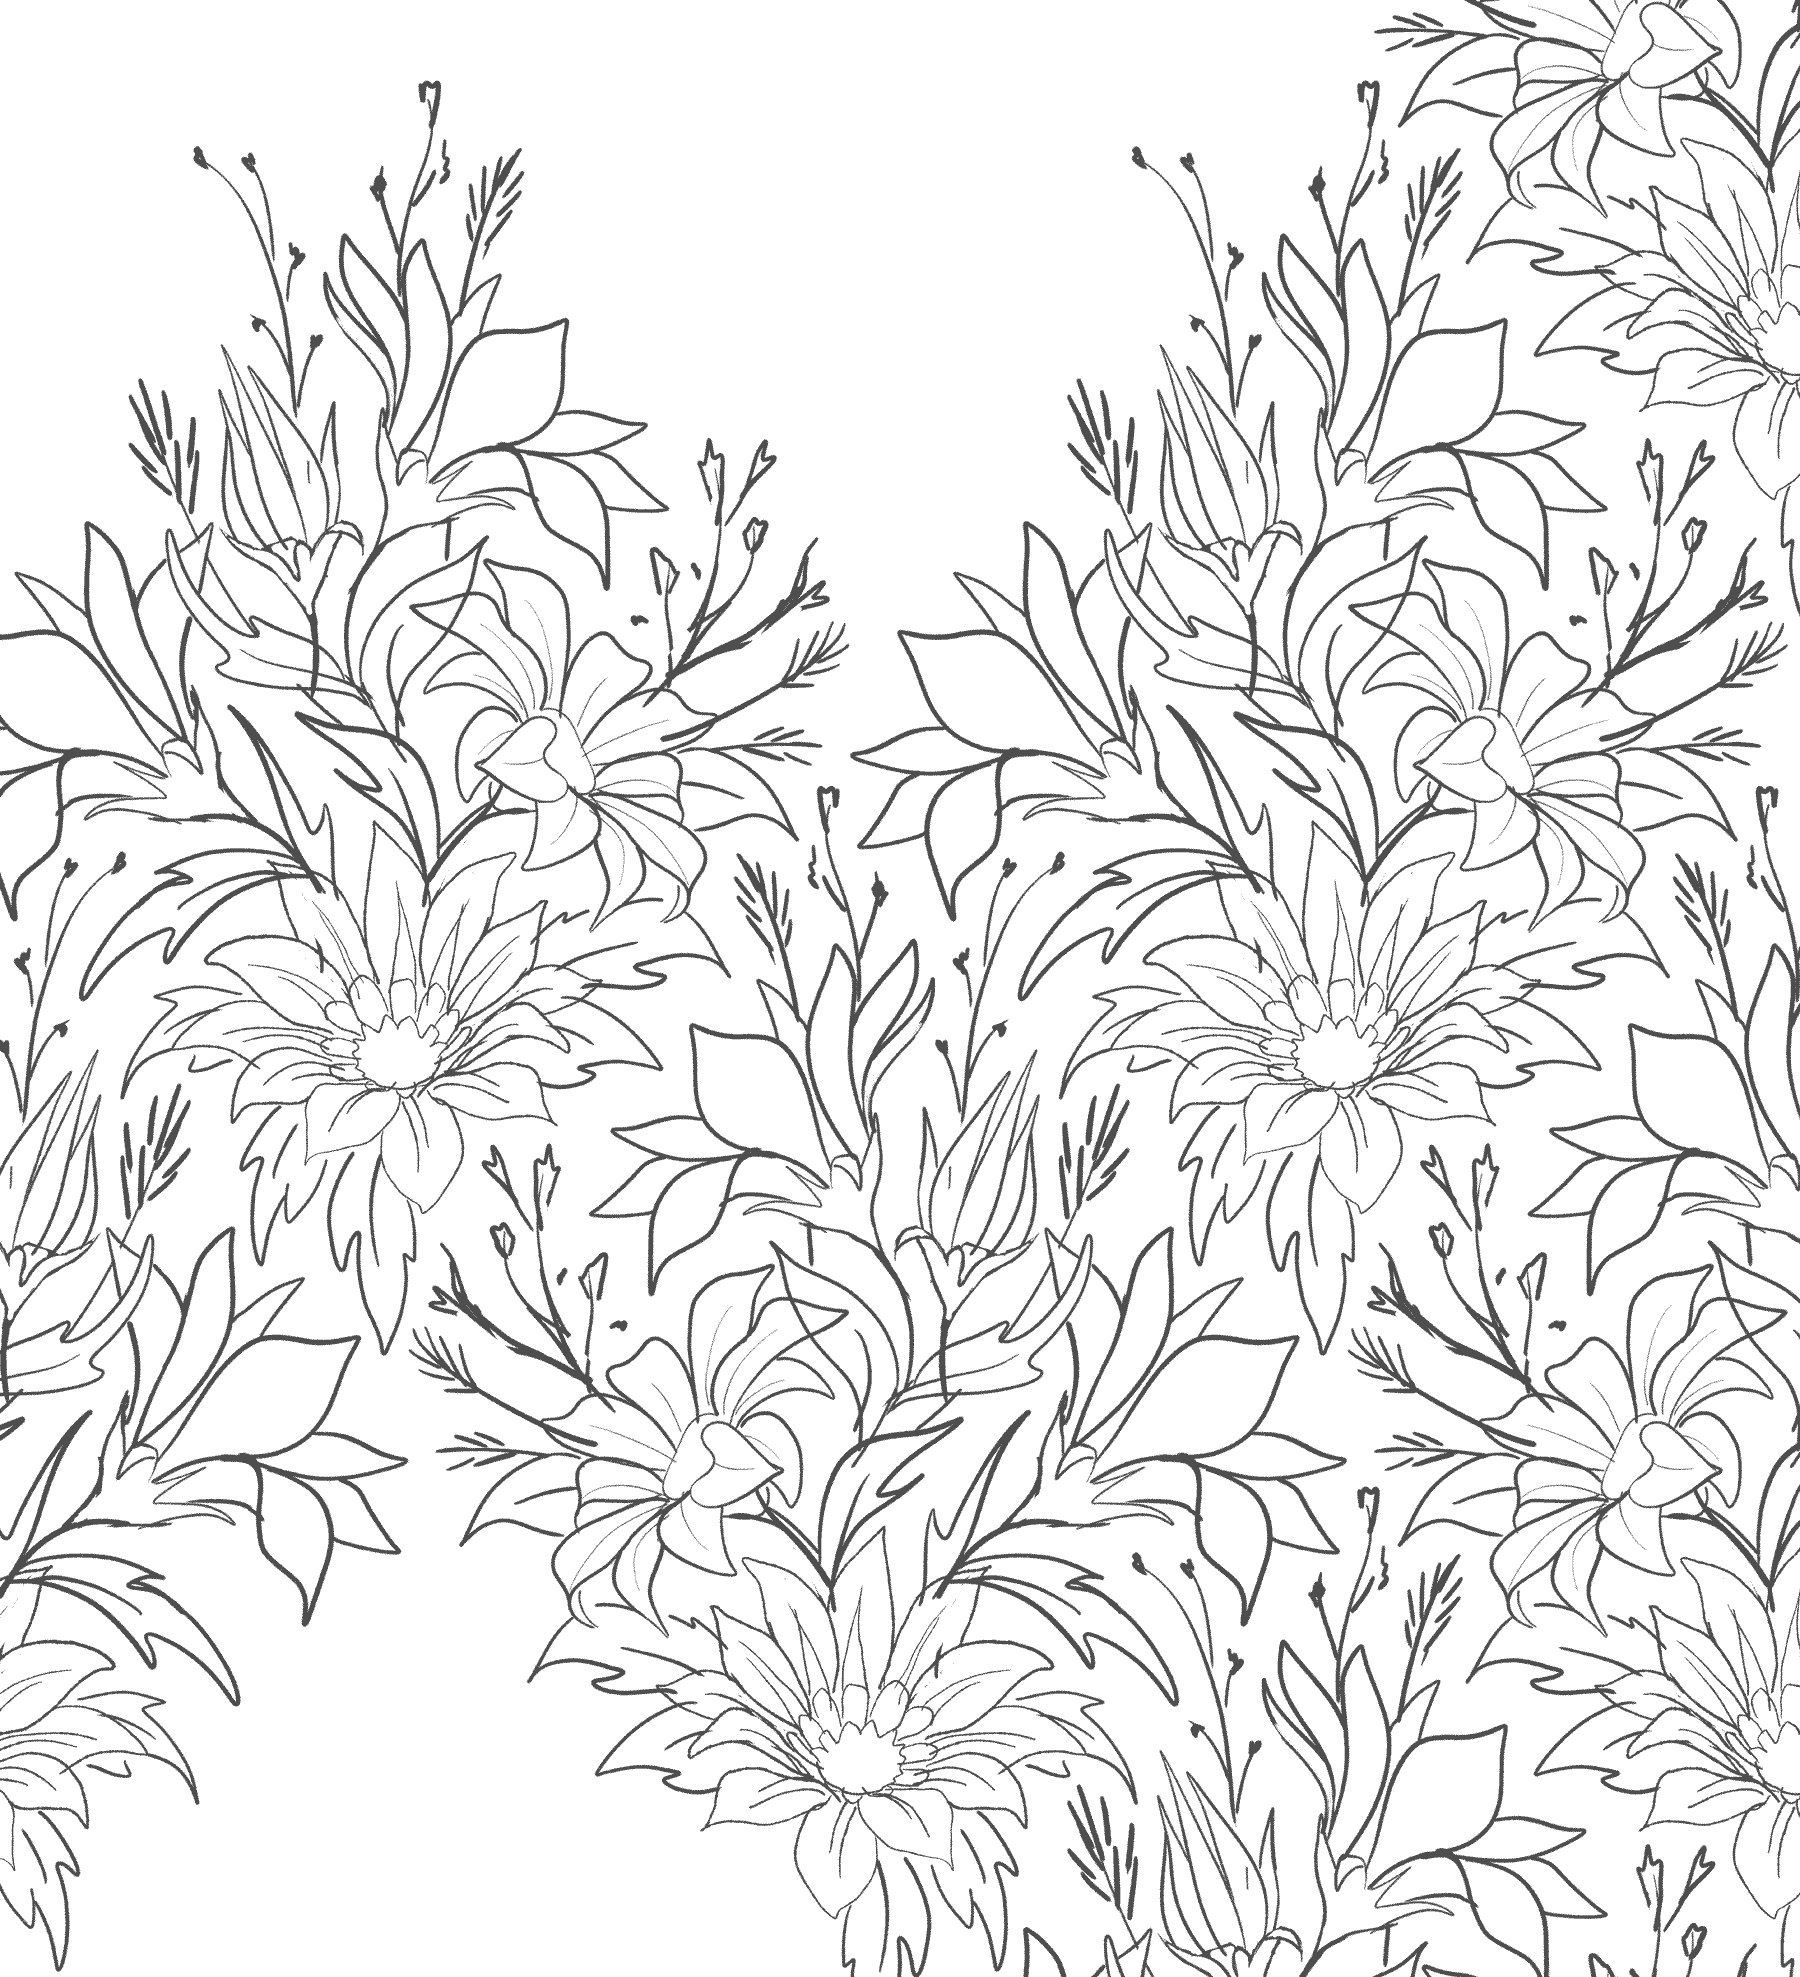 Gazania floral pattern concept art sketch by Andrea Muller